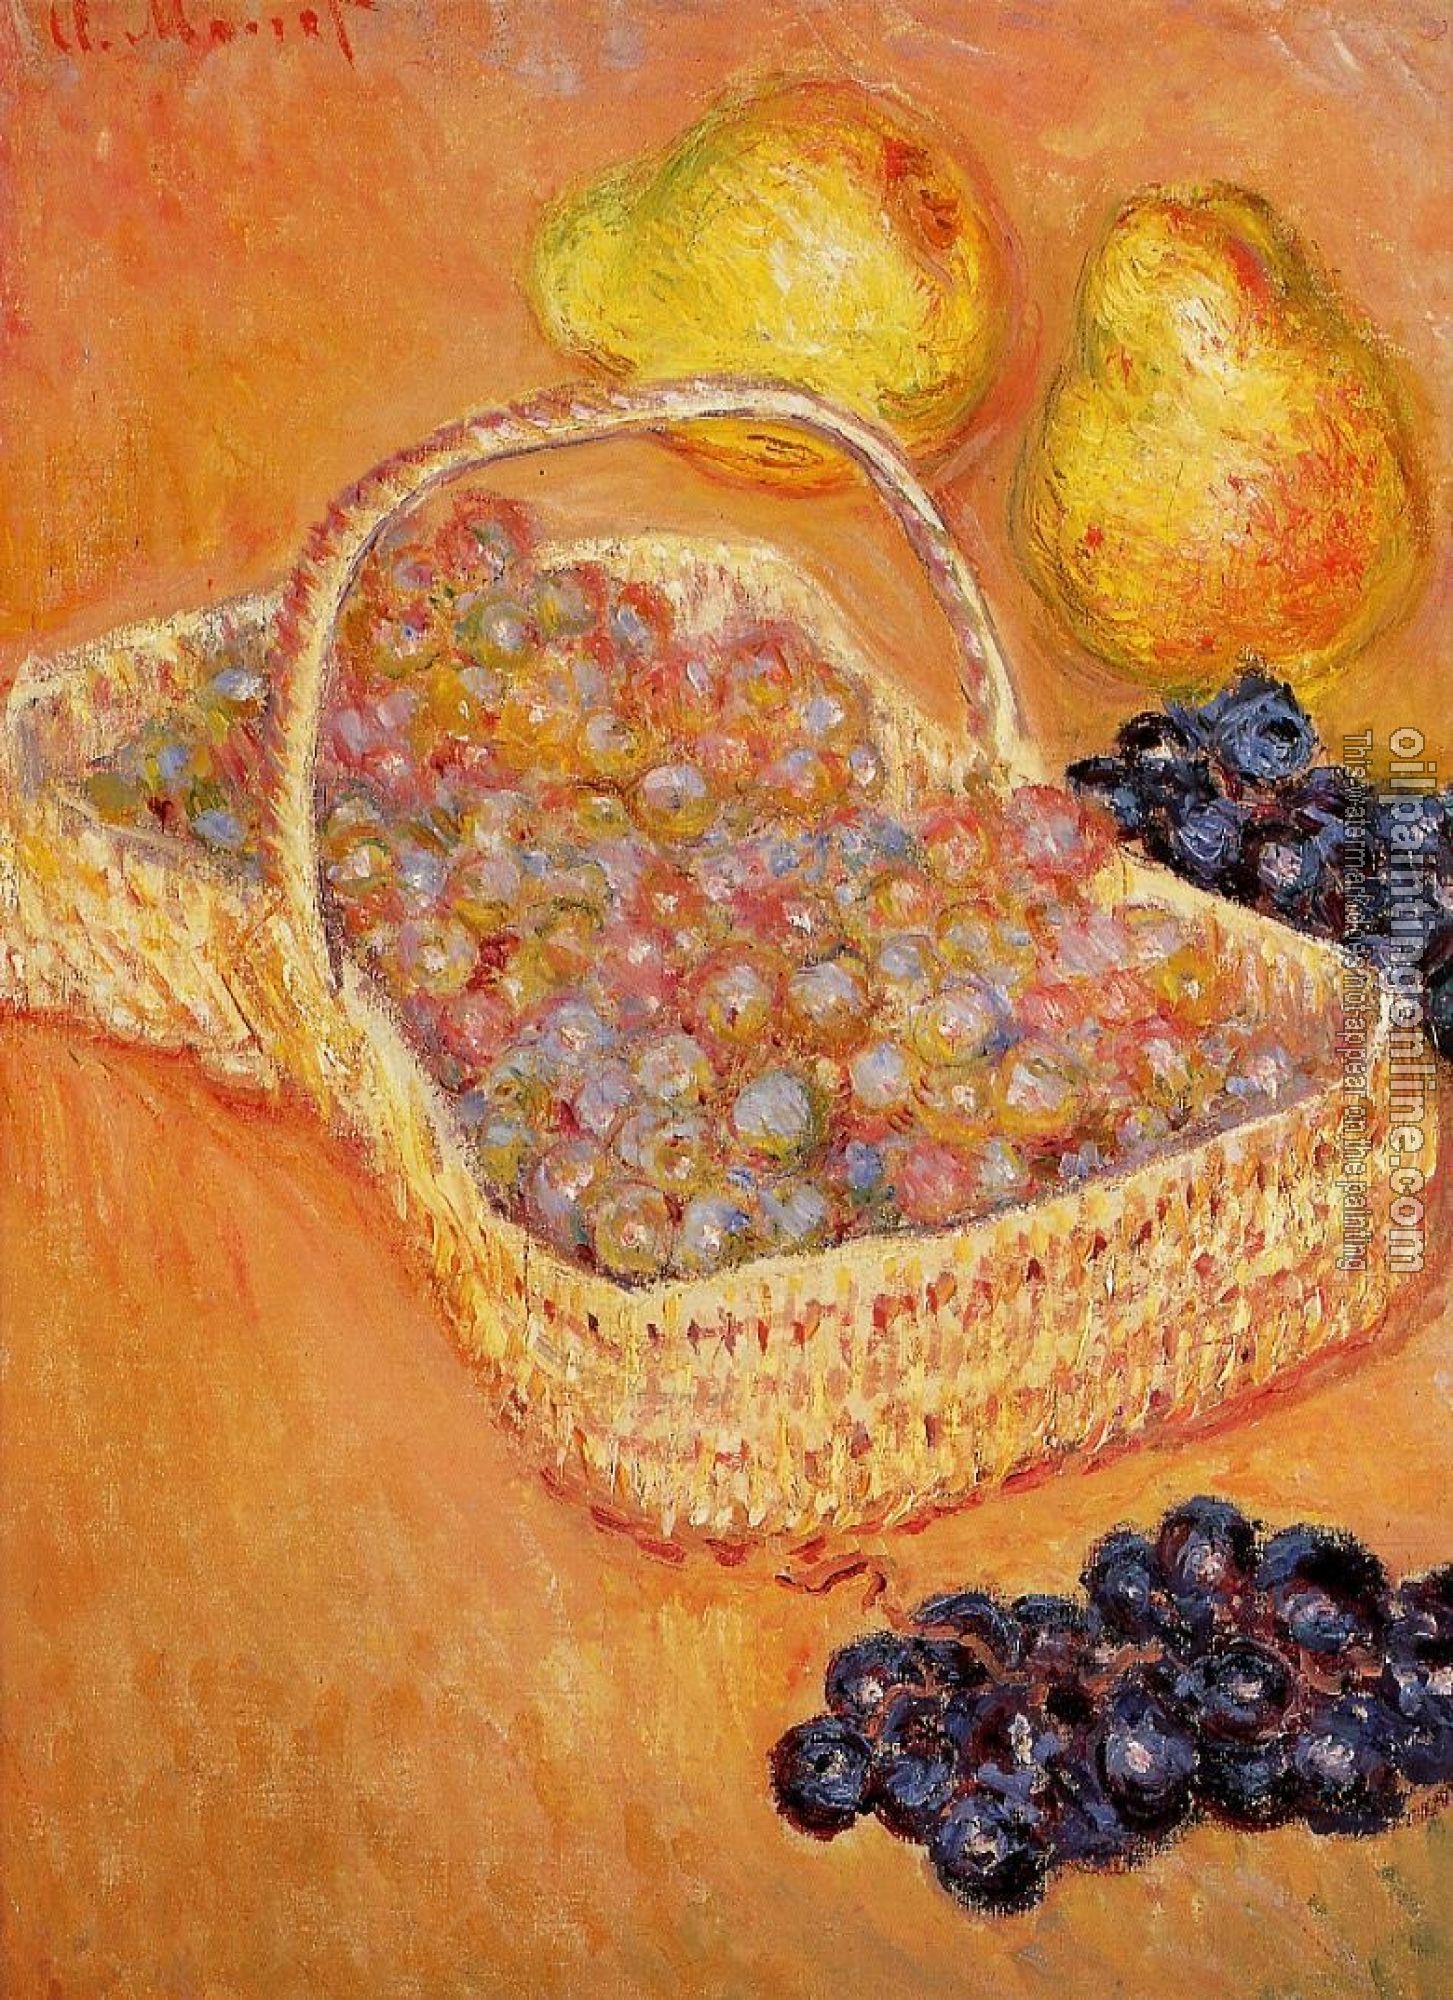 Monet, Claude Oscar - Basket of Graphes, Quinces and Pears